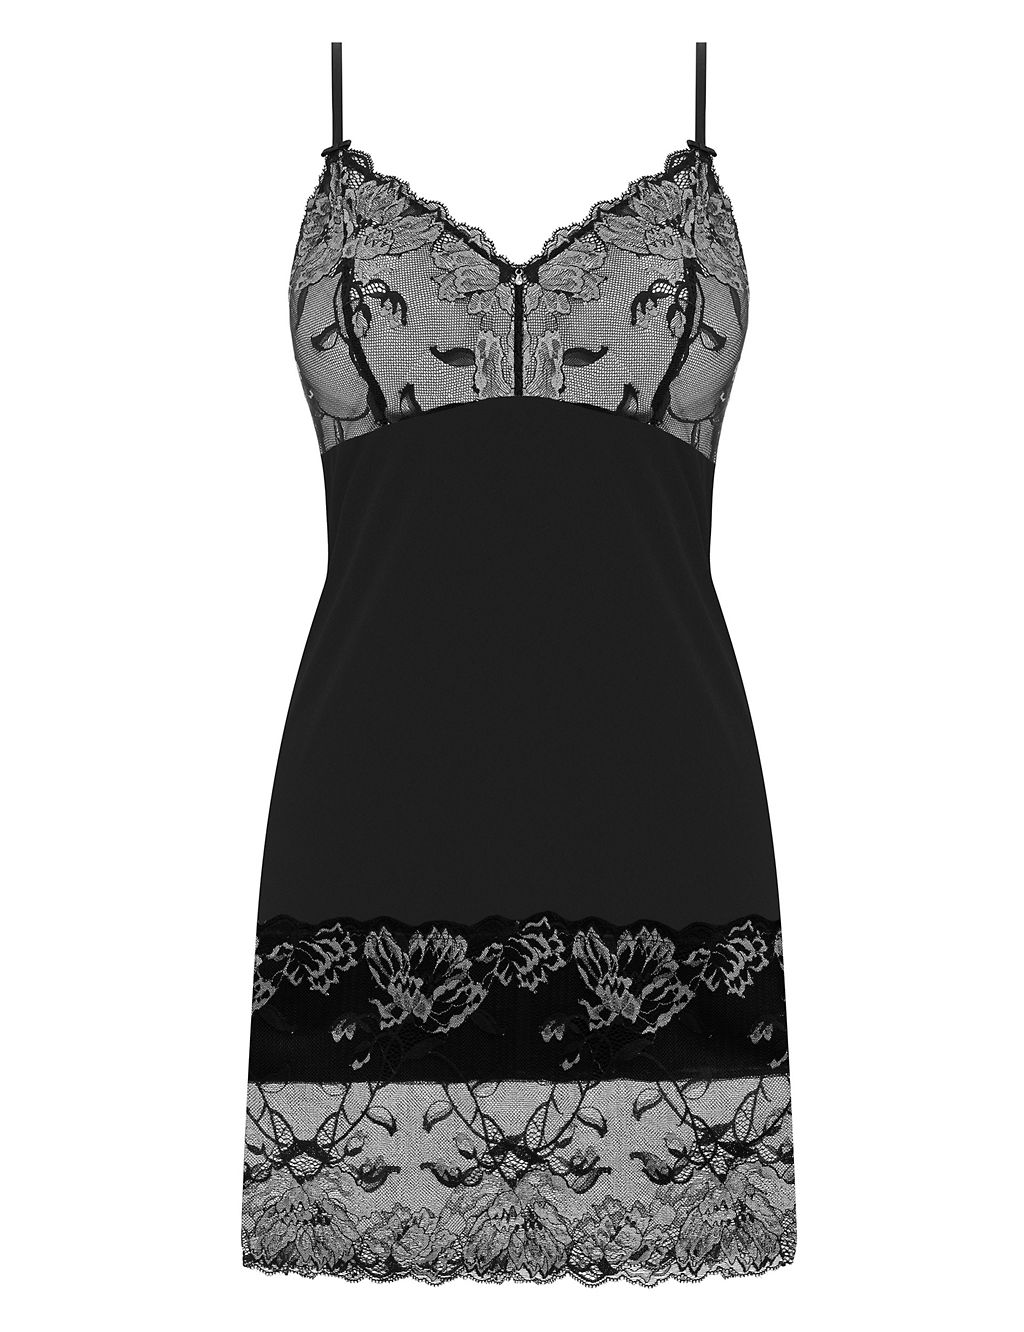 Aubree Strappy Lace Chemise 1 of 5